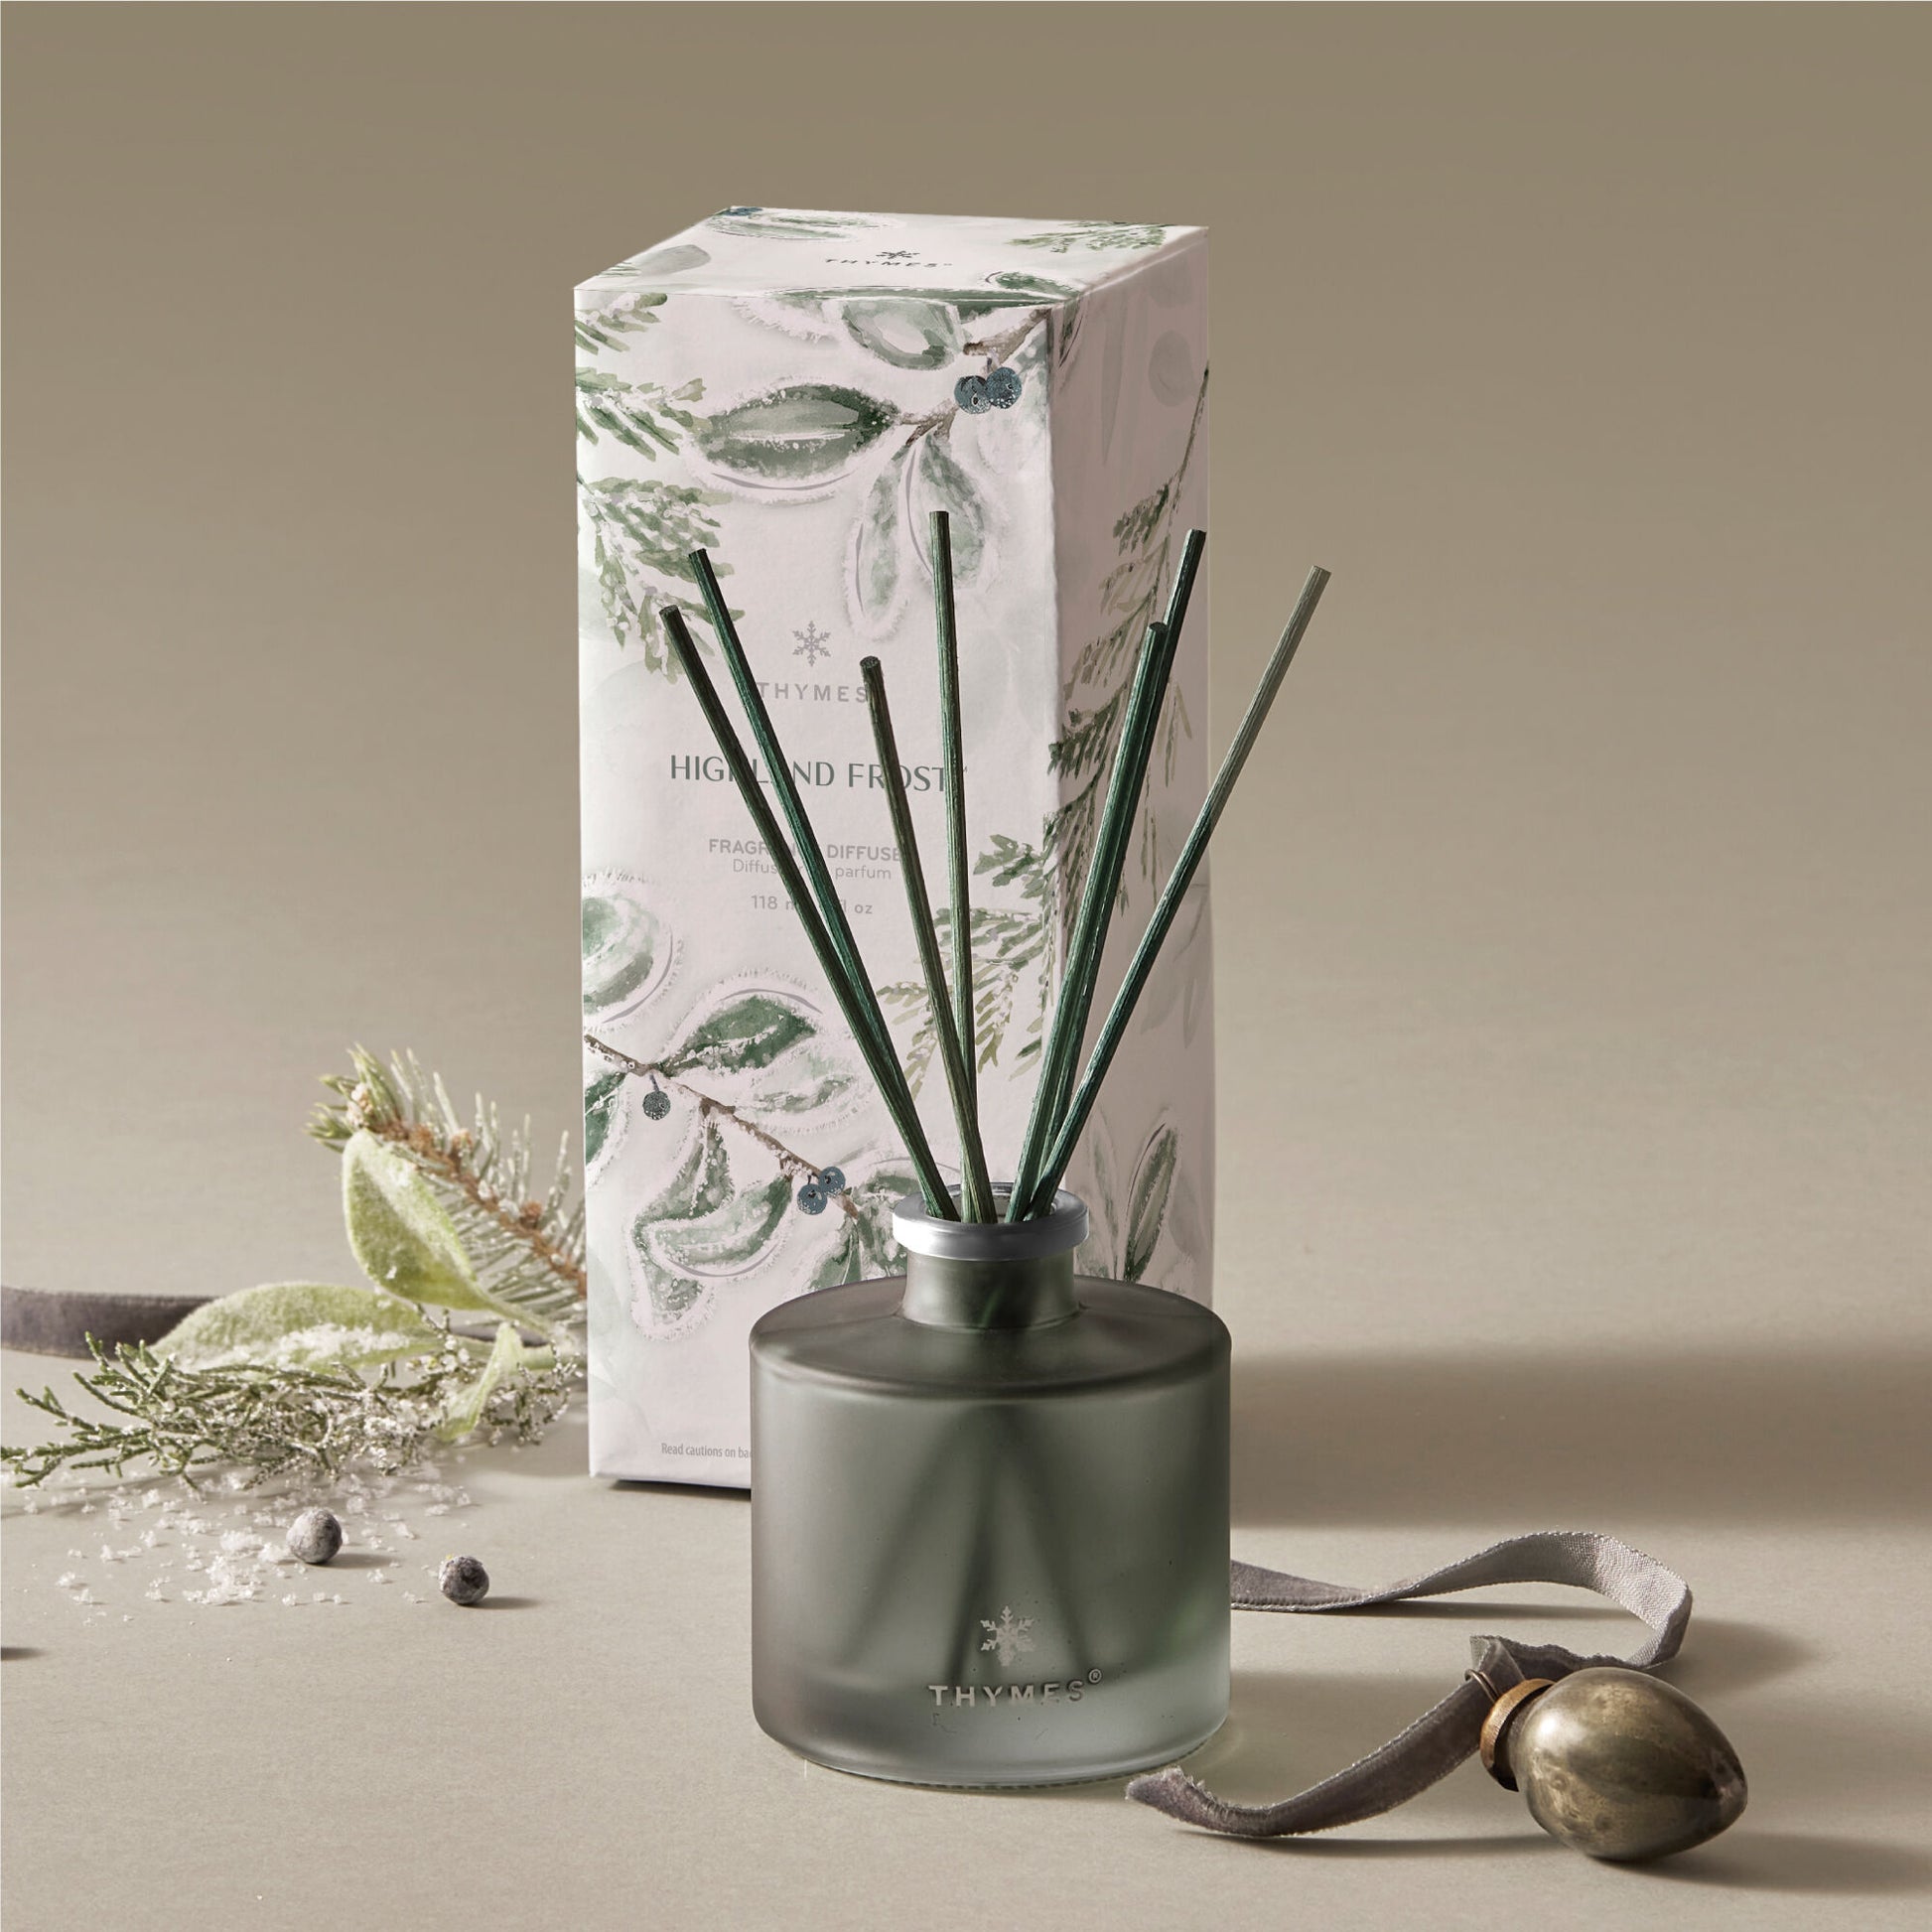 Highland Frost Petite Reed Diffuser display